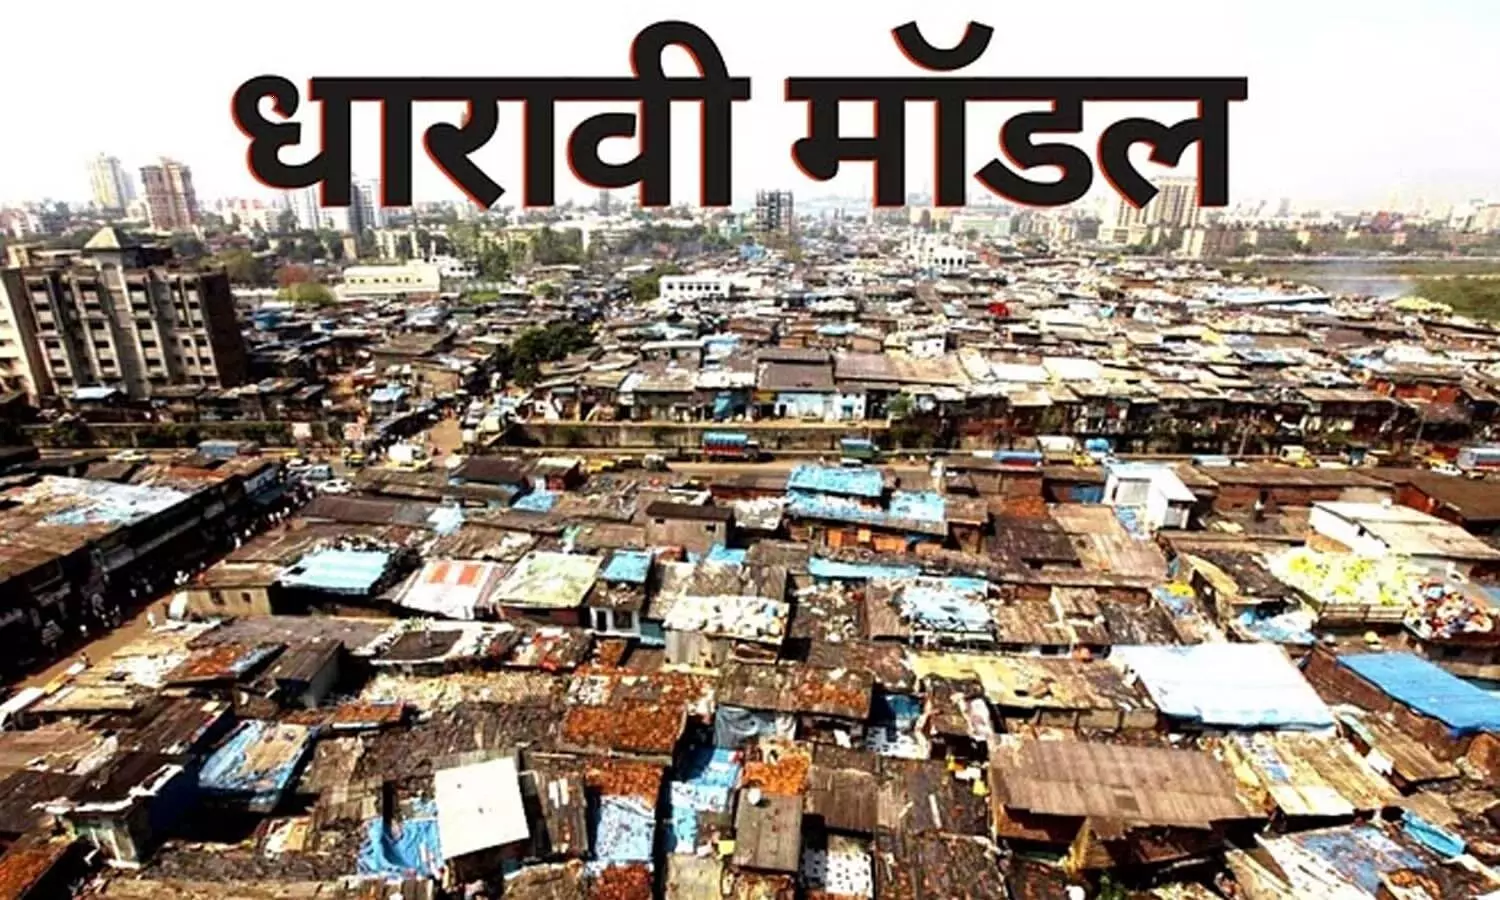 What is the re-development plan of Dharavi? Why changing the picture of Dharavi will be a big challenge